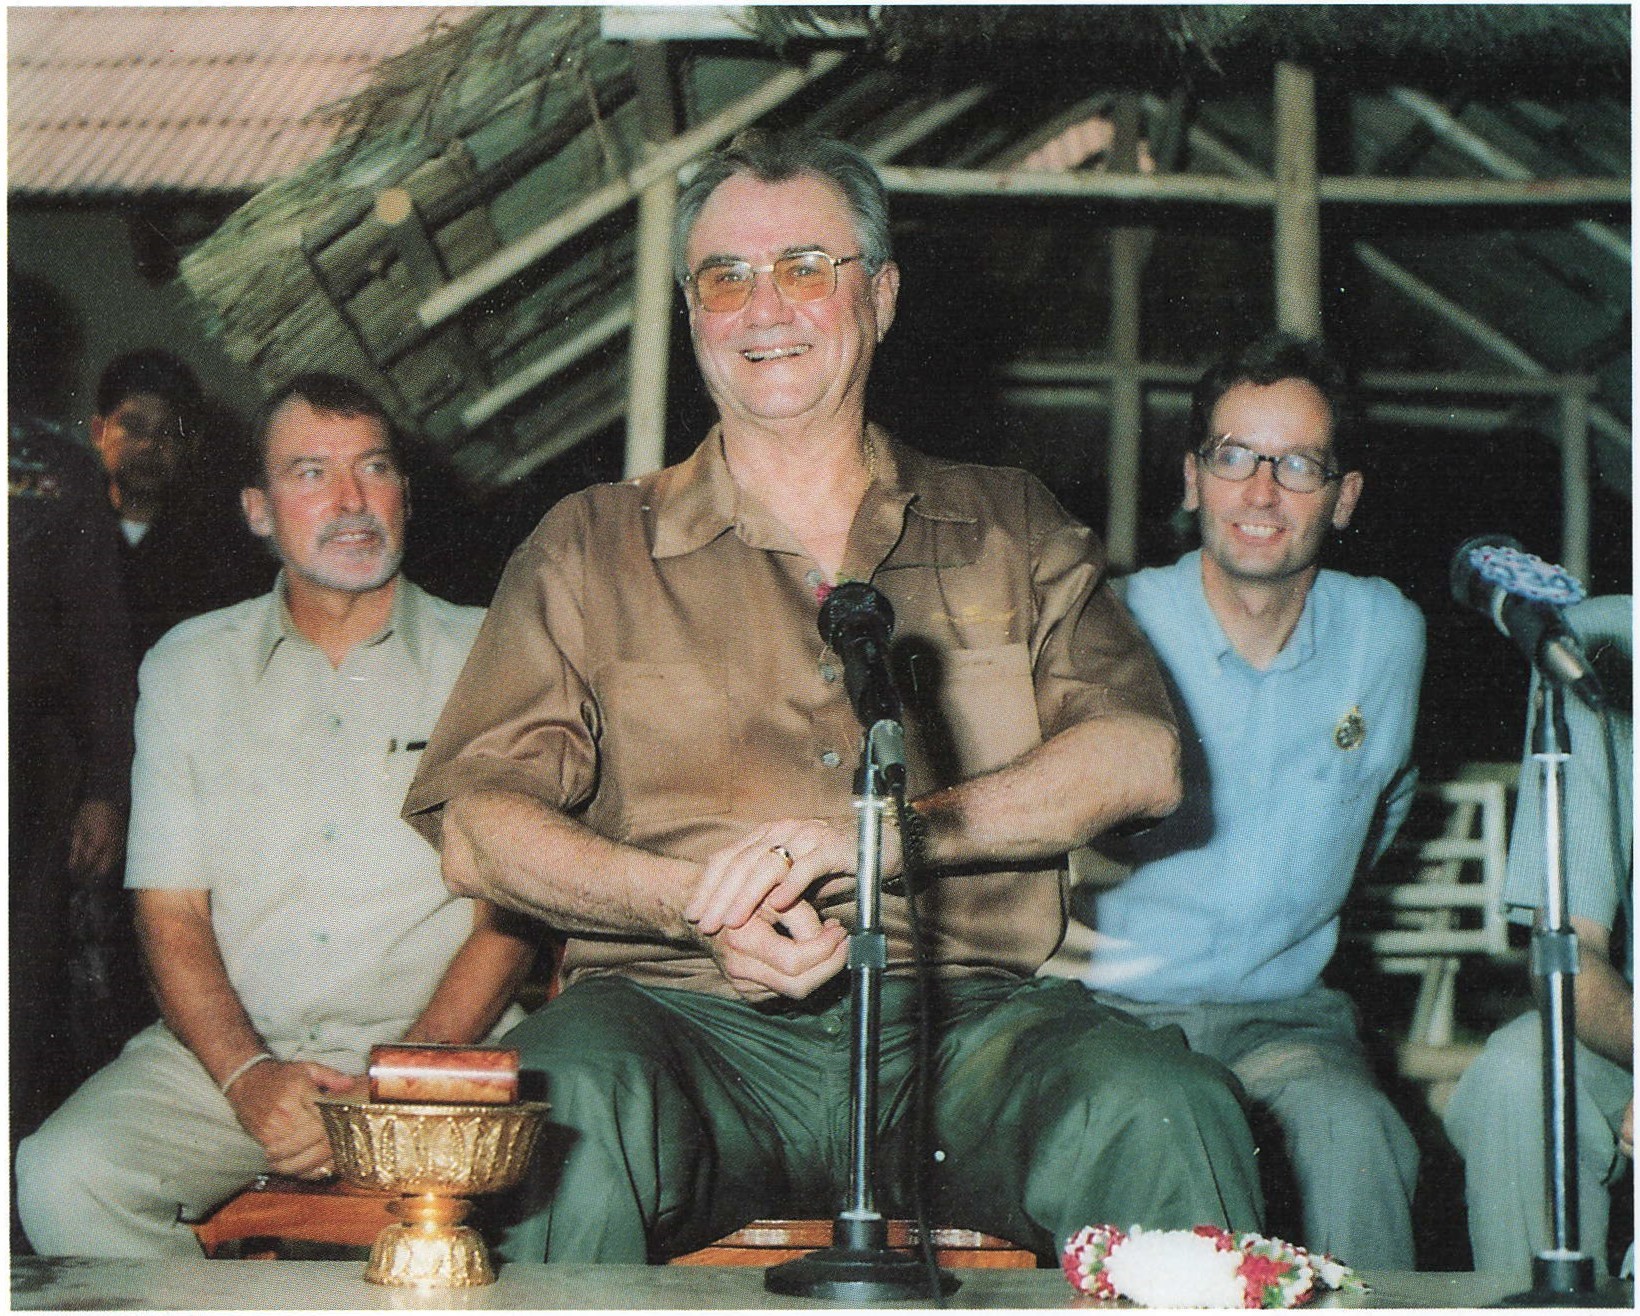 The late Prince Henrik of Denmark had a continuing interest in environmental programs in Thailand